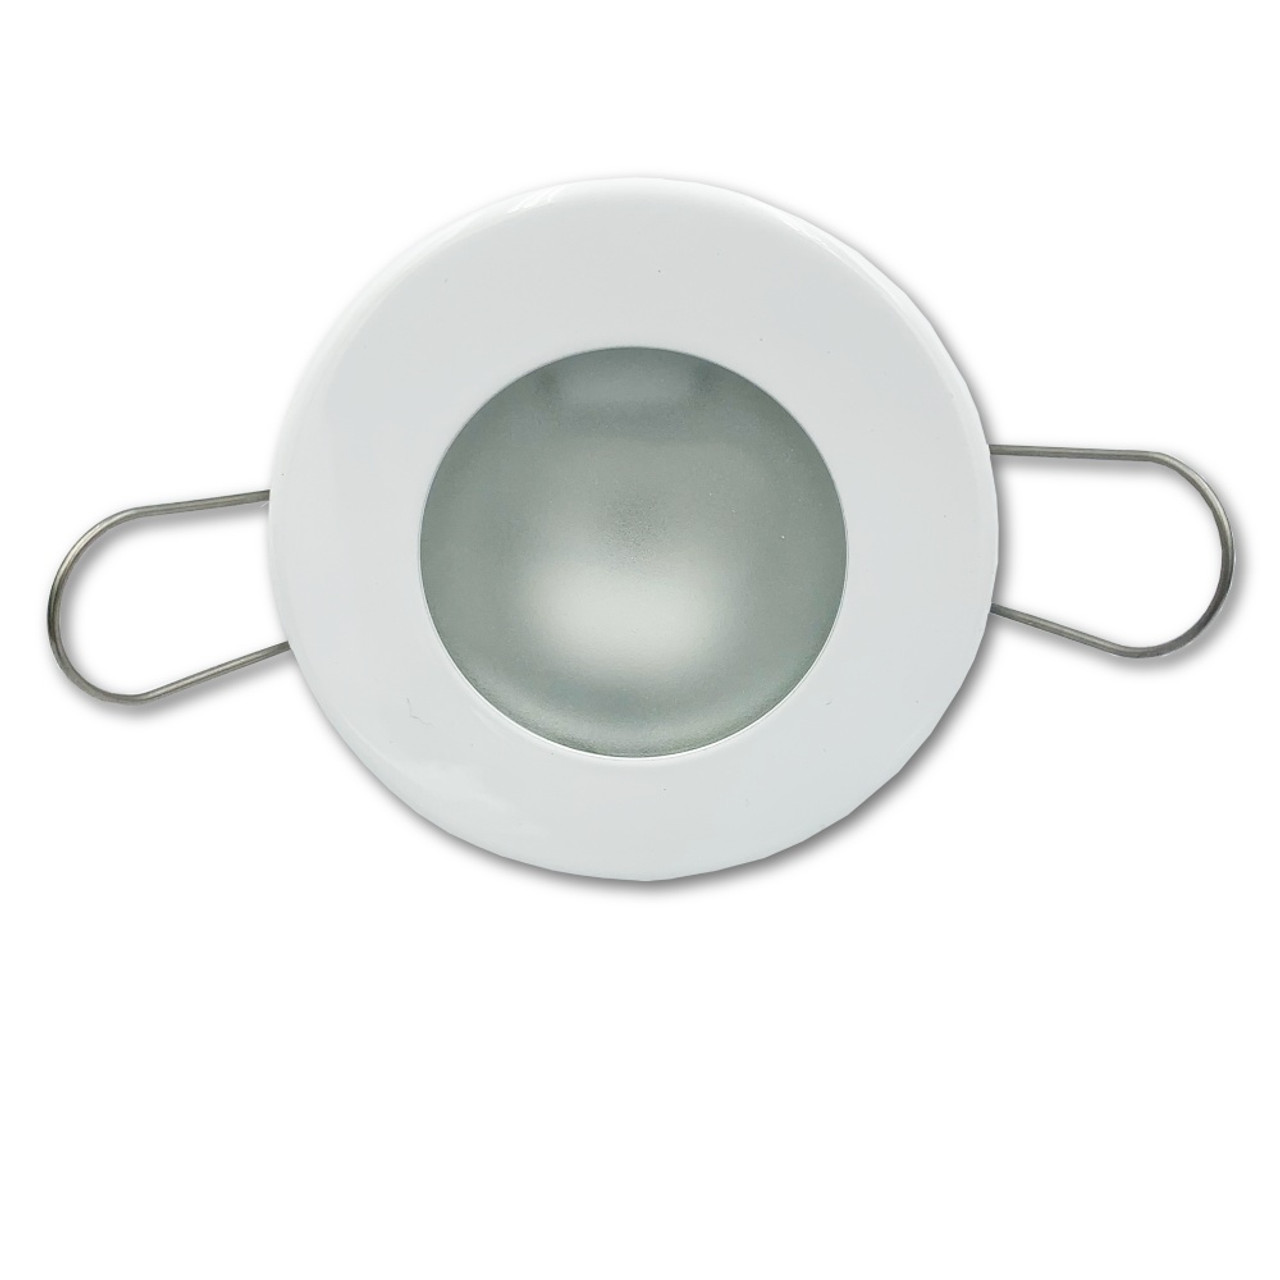 Mega LED - Chios HF Downlight Fixture - Stainless Steel 316, For G4 Bulb - Apollo Lighting